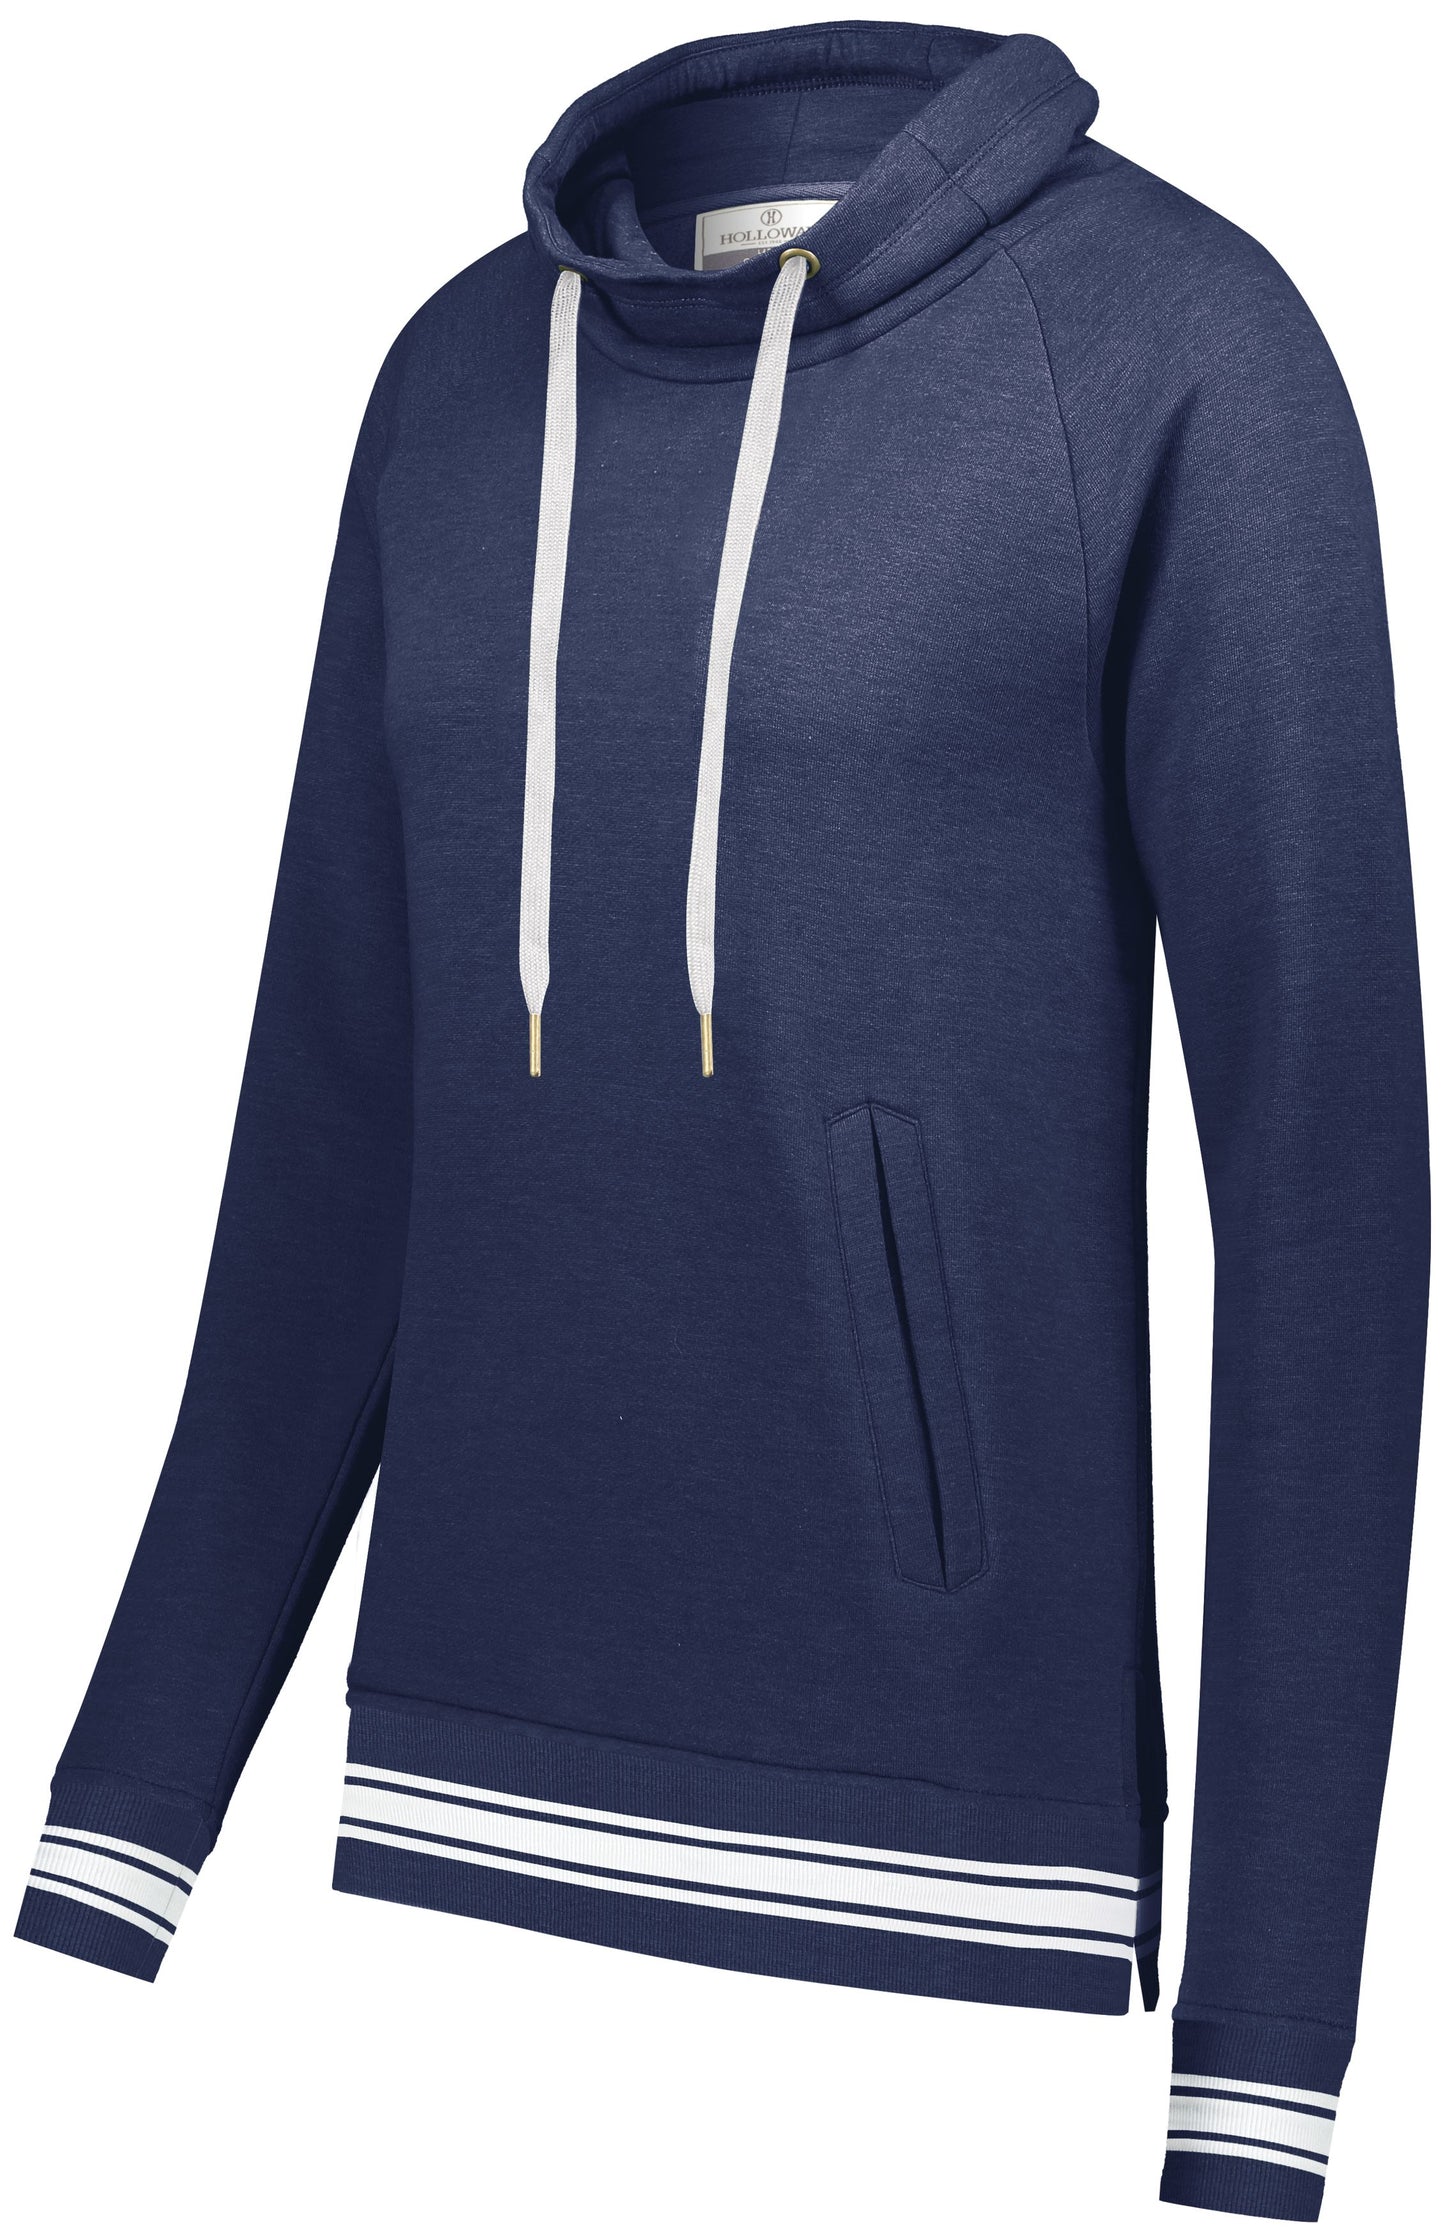 HOLLOWAY - LADIES IVY LEAGUE FUNNEL NECK PULLOVER